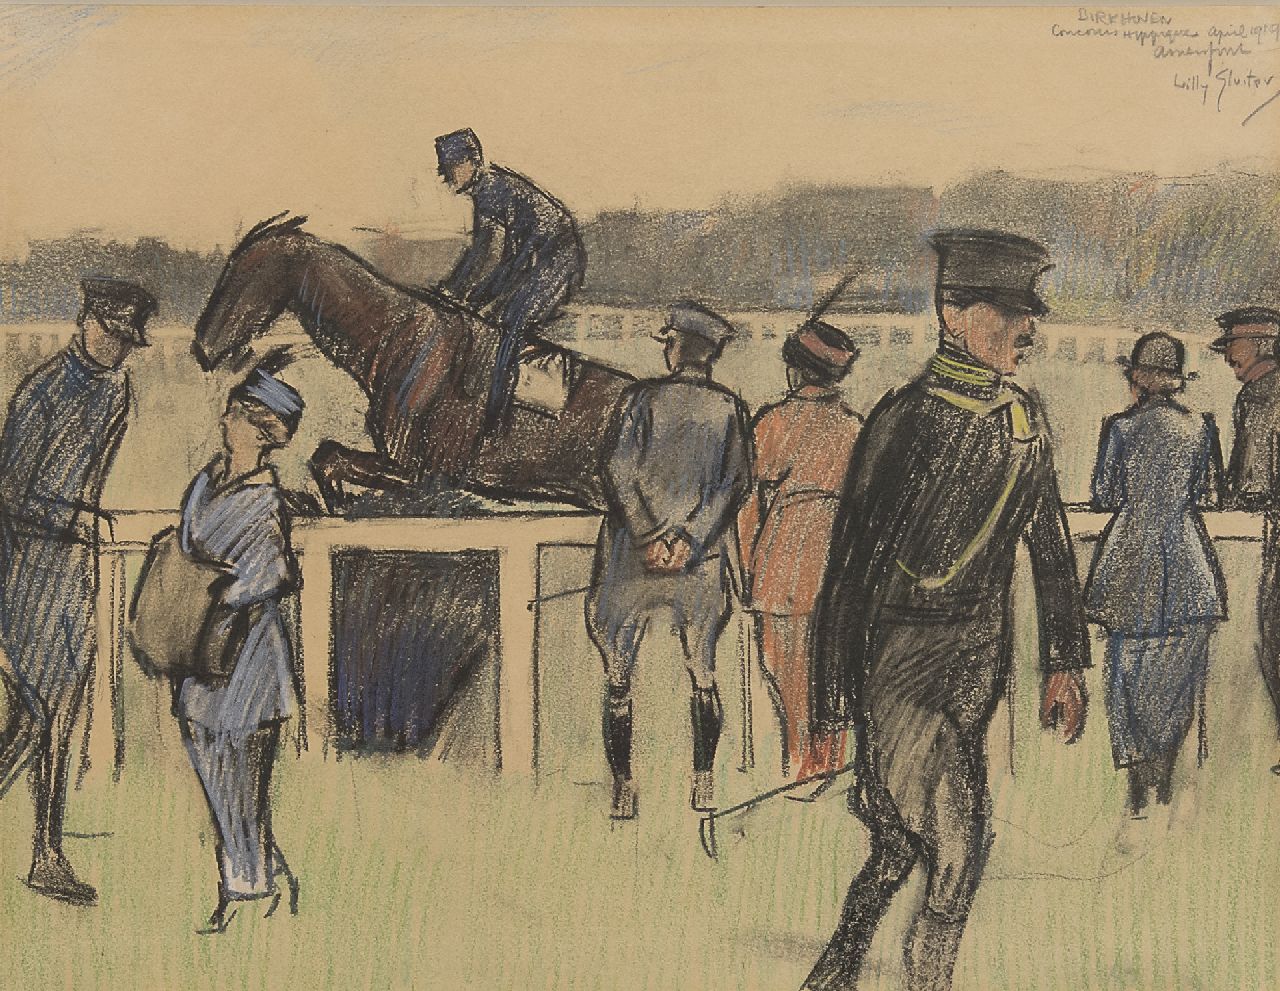 Sluiter J.W.  | Jan Willem 'Willy' Sluiter | Watercolours and drawings offered for sale | Concours Hippique op Birkhoven, coloured chalk on paper 27.2 x 36.0 cm, signed u.r. and dated 'april 1910 Amersfoort'